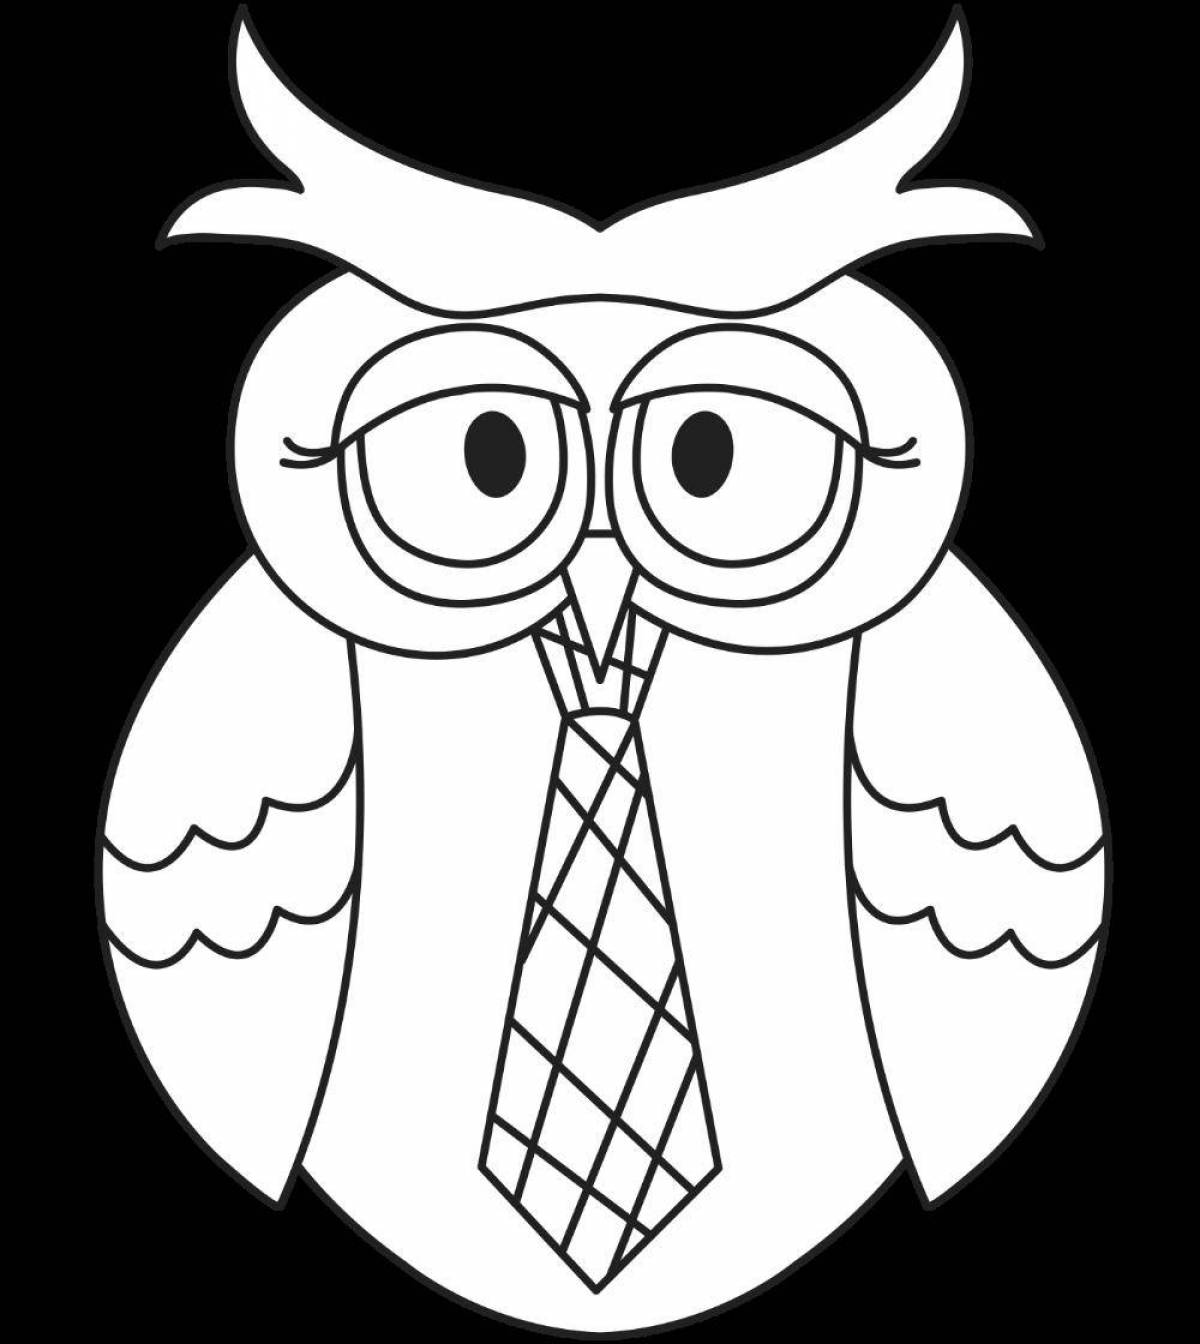 Shining wise owl coloring book for kids